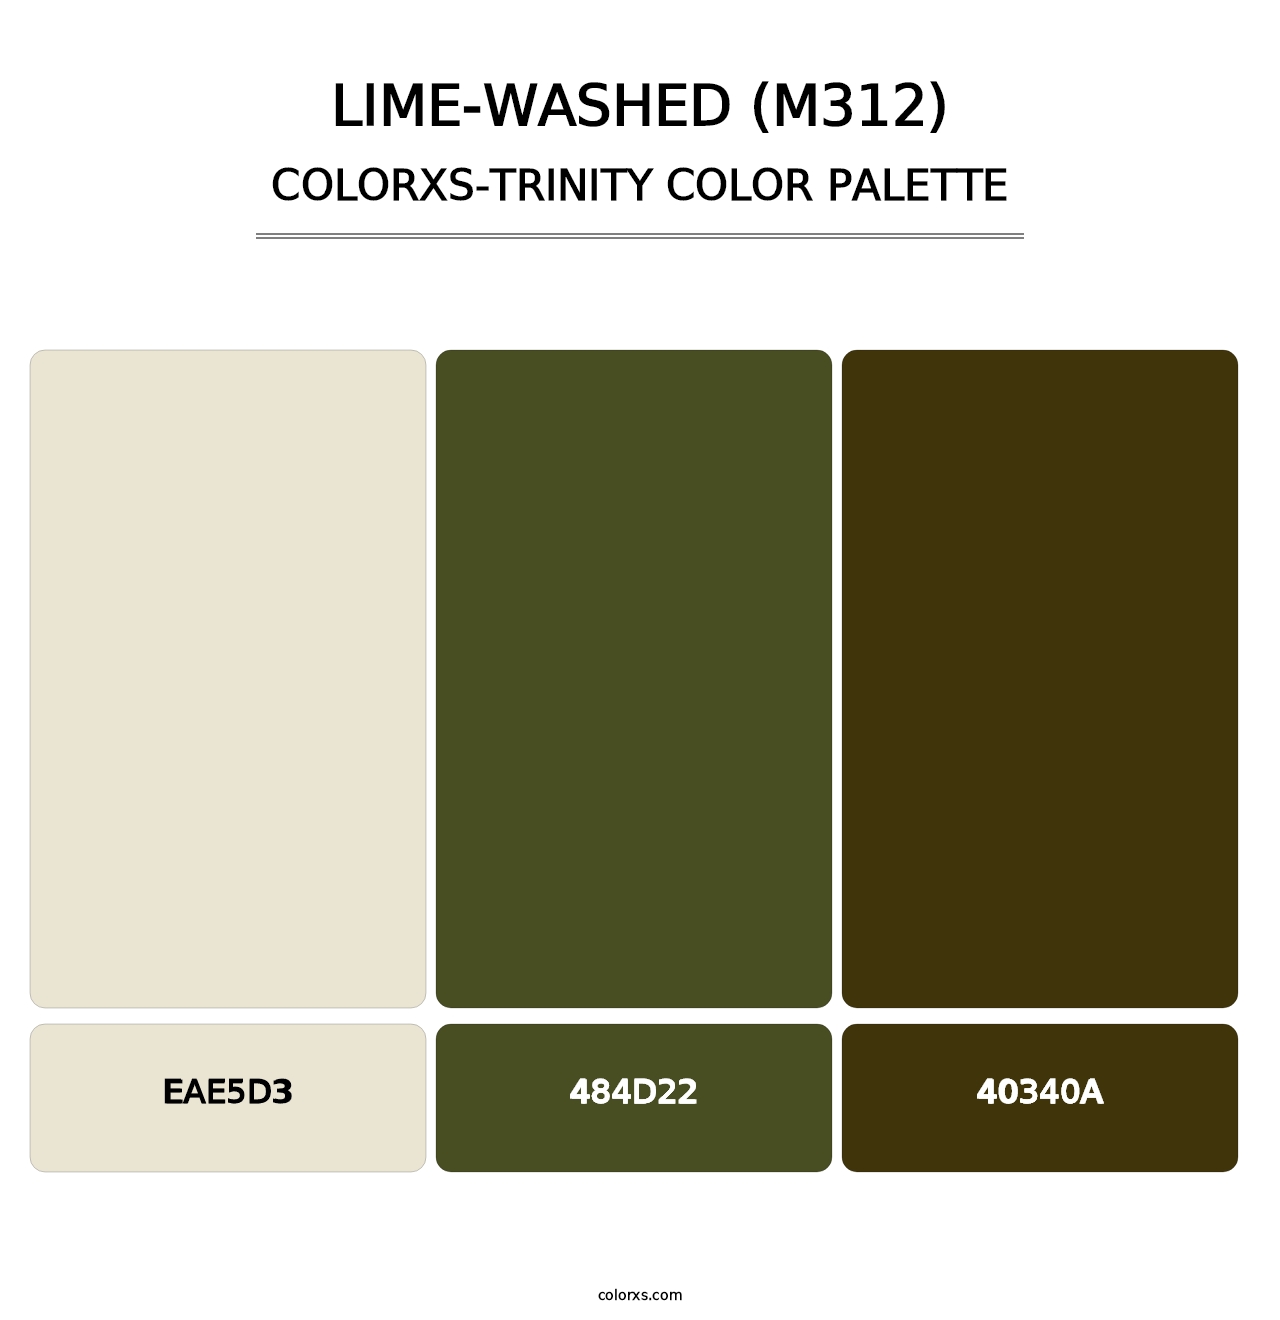 Lime-Washed (M312) - Colorxs Trinity Palette